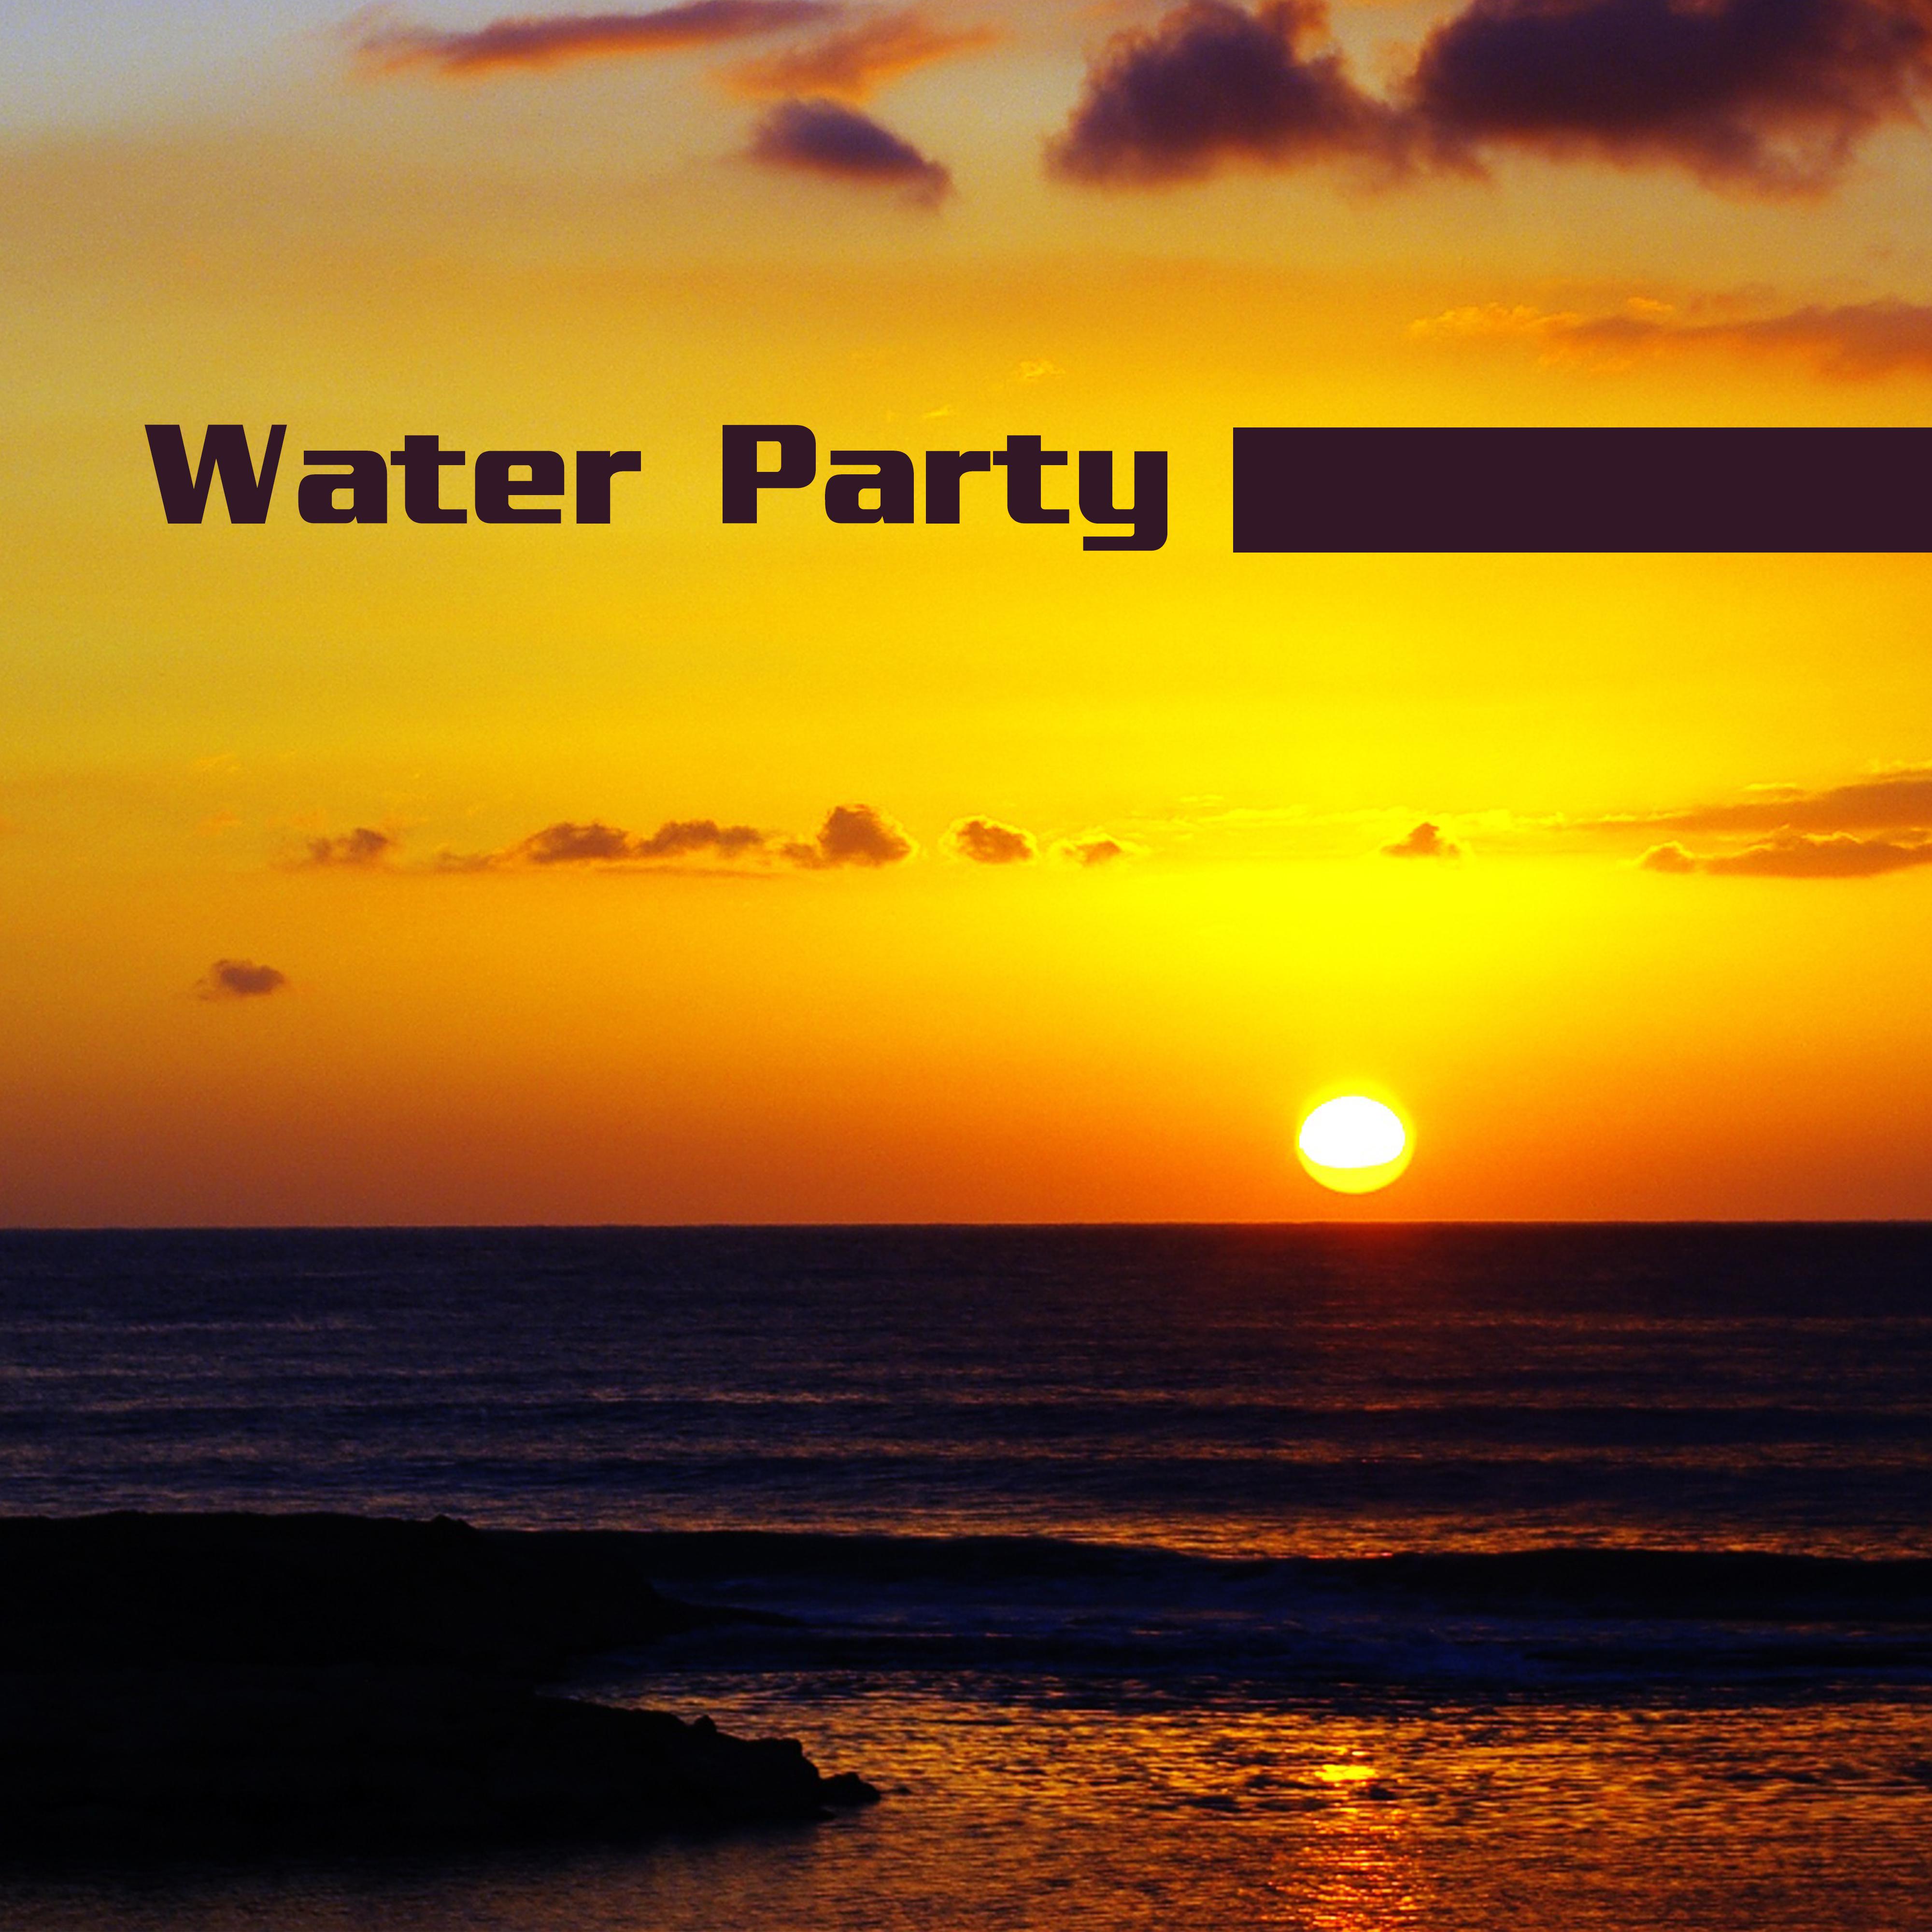 Water Party – Holiday Chill Out Music, Ibiza Coast, Summer Chill, Beach Party, Crazy Holiday, Ambient Lounge, Hot Riviera